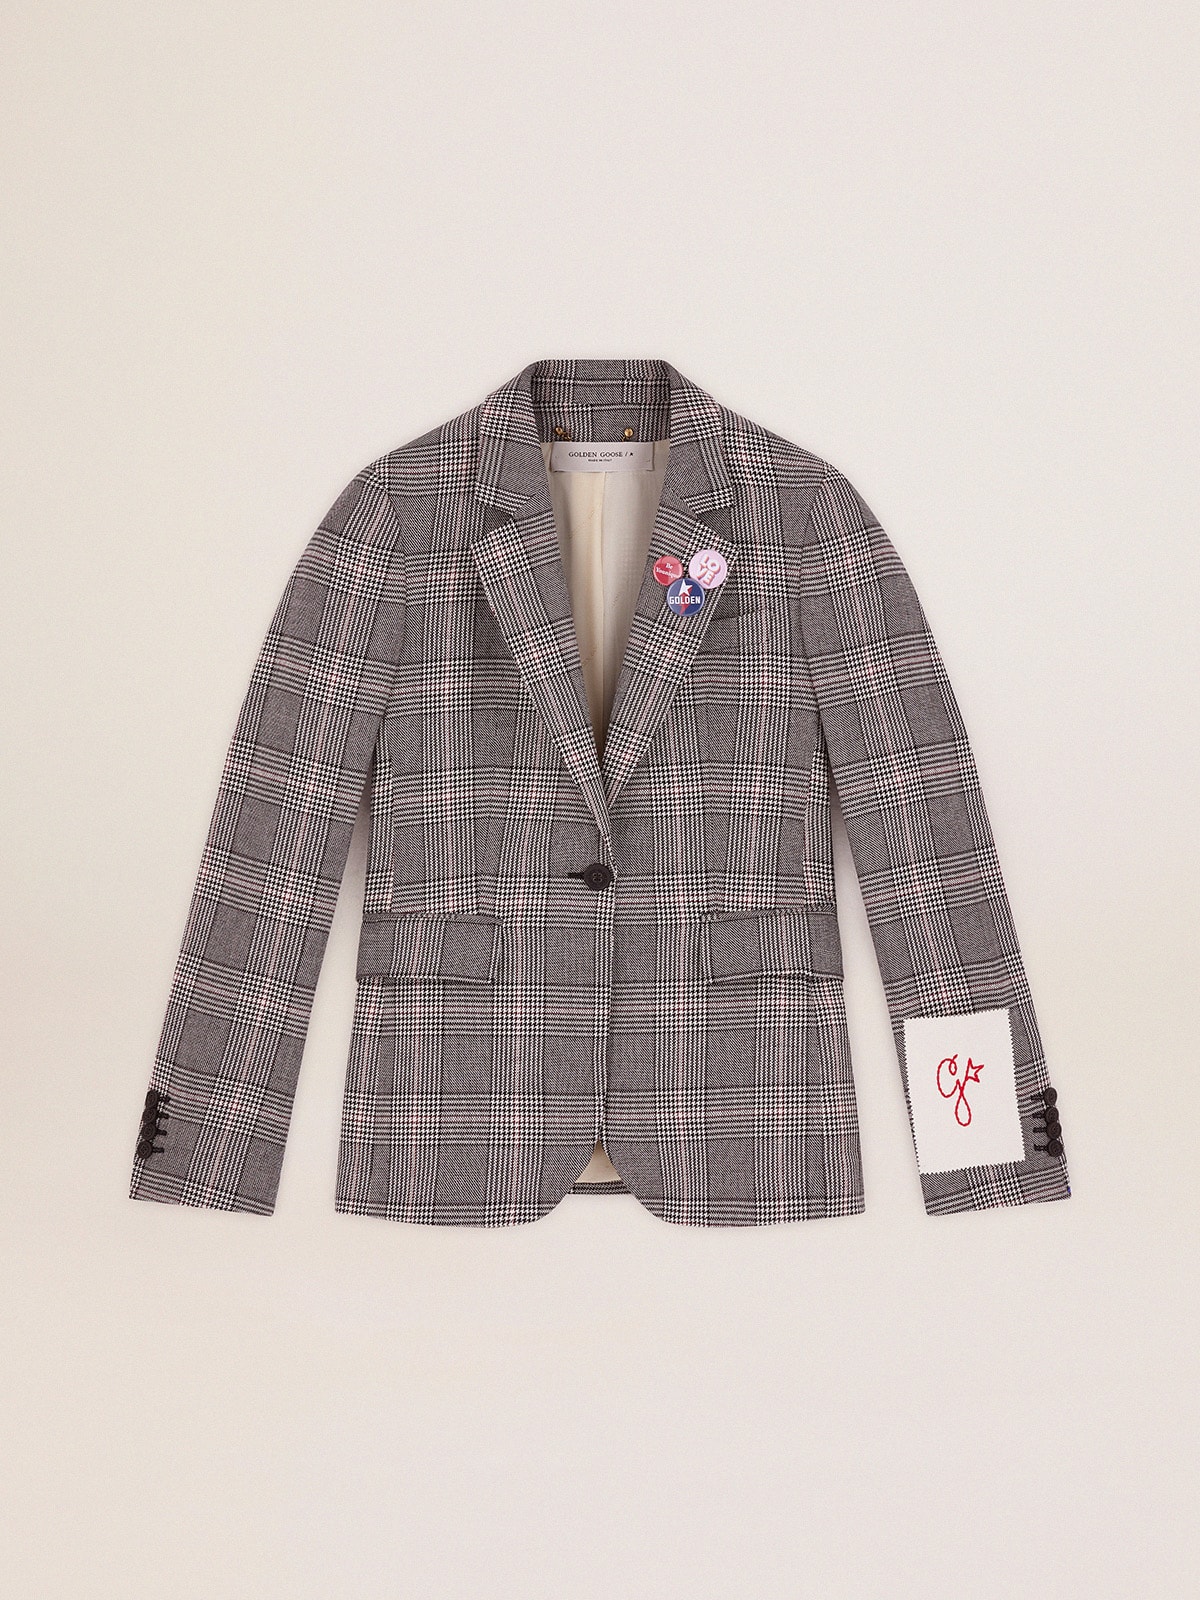 Women's Golden Collection single-breasted blazer in gray and white Prince of Wales check